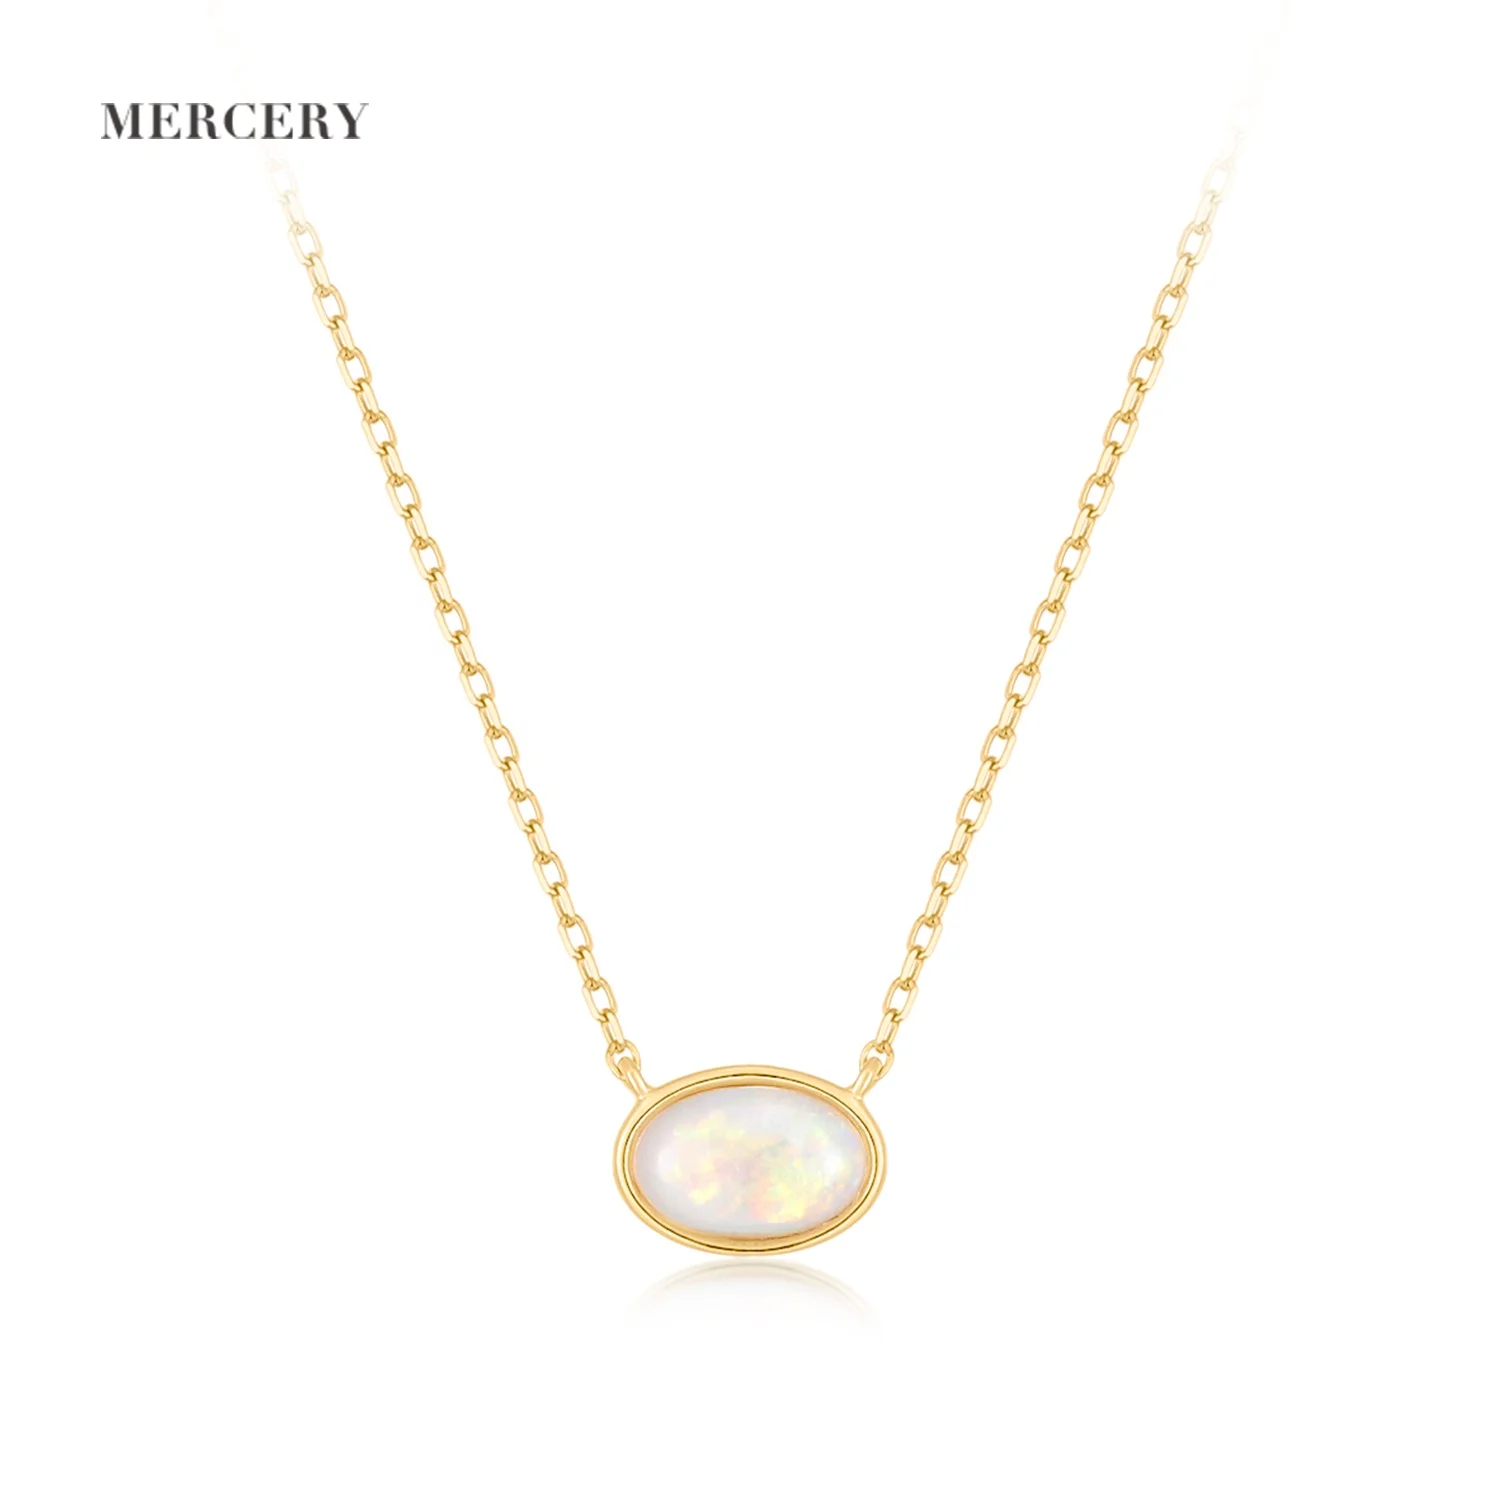 

Mercery Modern Fine Jewelry Gem Stone Rainbow Natural Opal Pendant Necklaces 14k Solid Yellow Gold Necklace Gift For Women